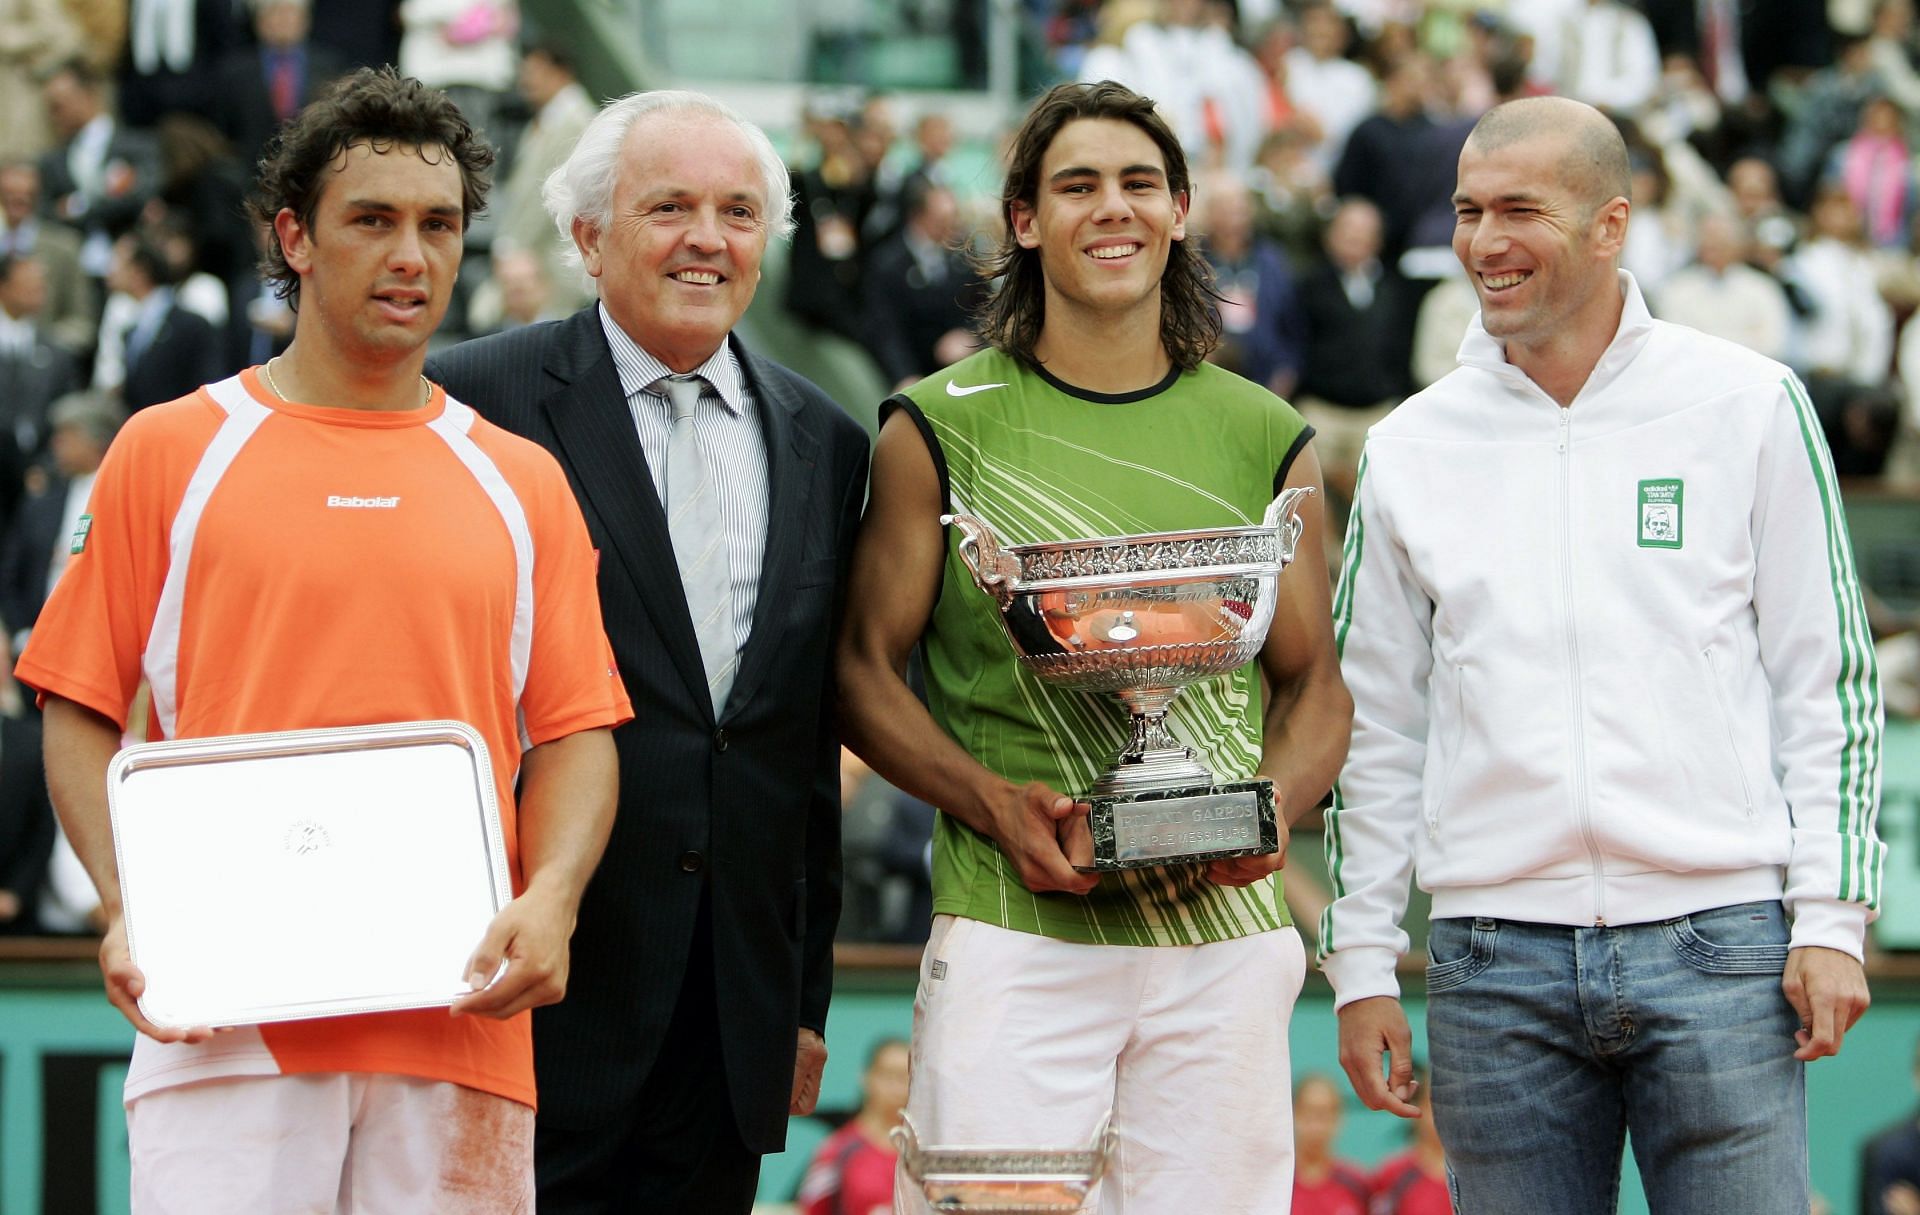 Rafael Nadal beat Mariano Puerta to win his first Roland Garros title.